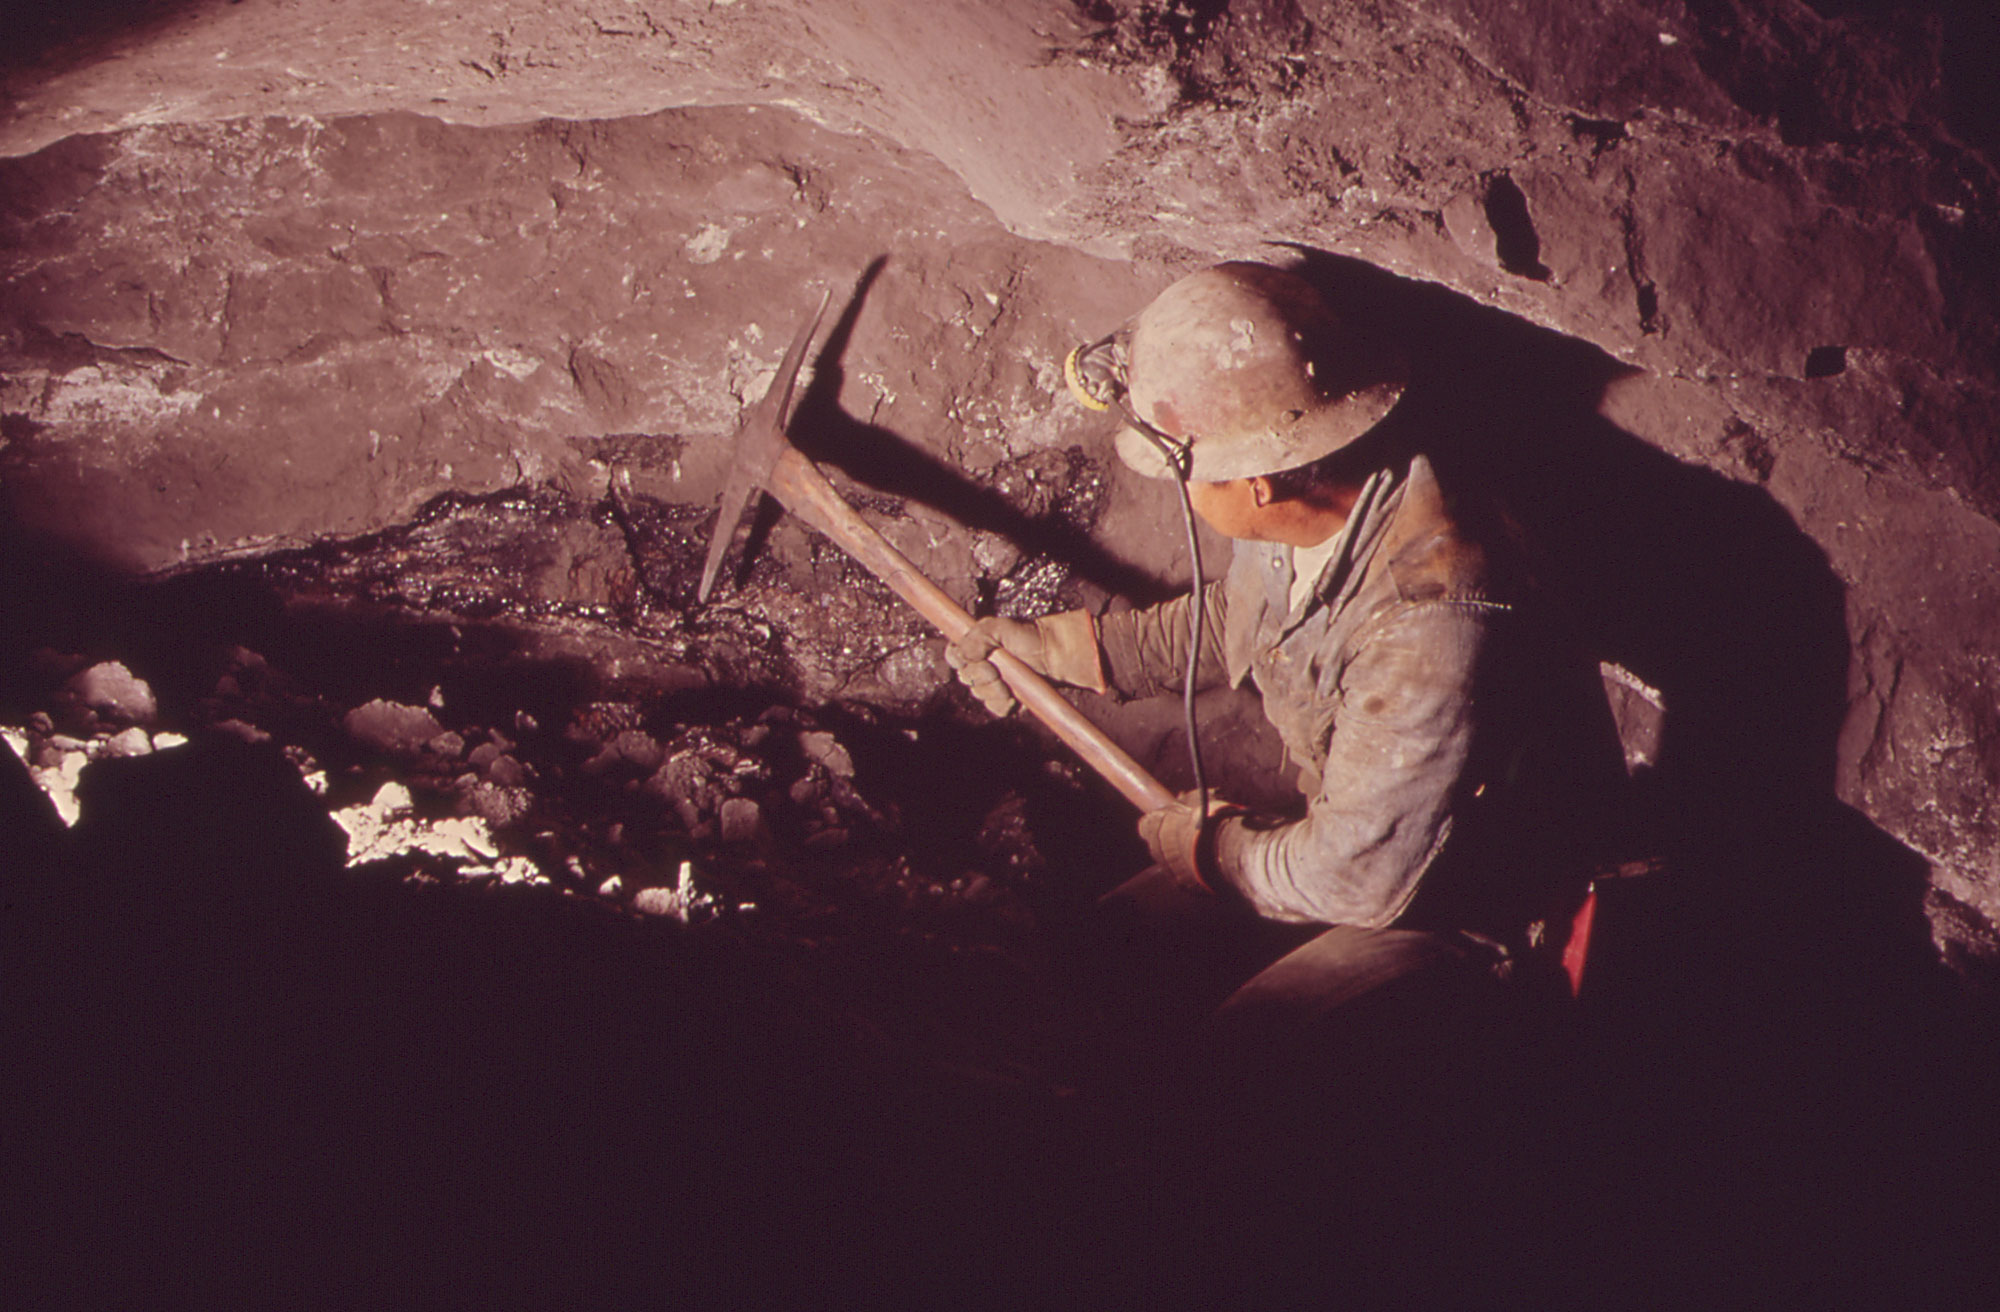 Photograph of a miner in an underground uranium mine. The miner wears a hardhat with a light on the front and holds a large pick in both hands. He is dressed in a long-sleeve blue button-down shirt and wears leather gloves. The rock surrounding him is gray.